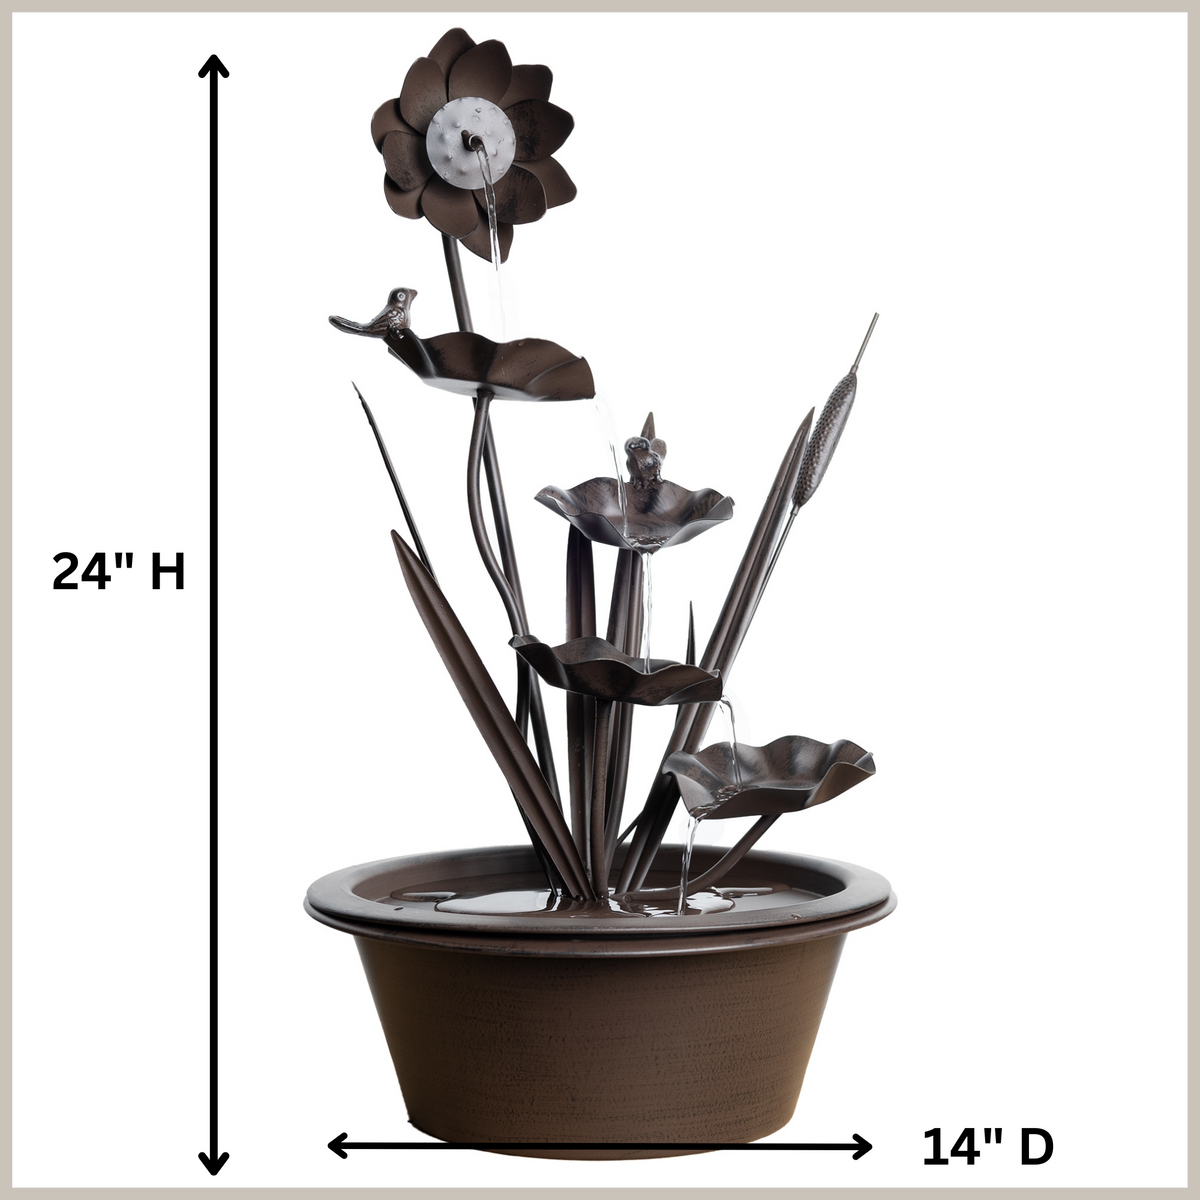 Flower and Bird water fountain measures 24 inches high and 14 inches in diameter. 